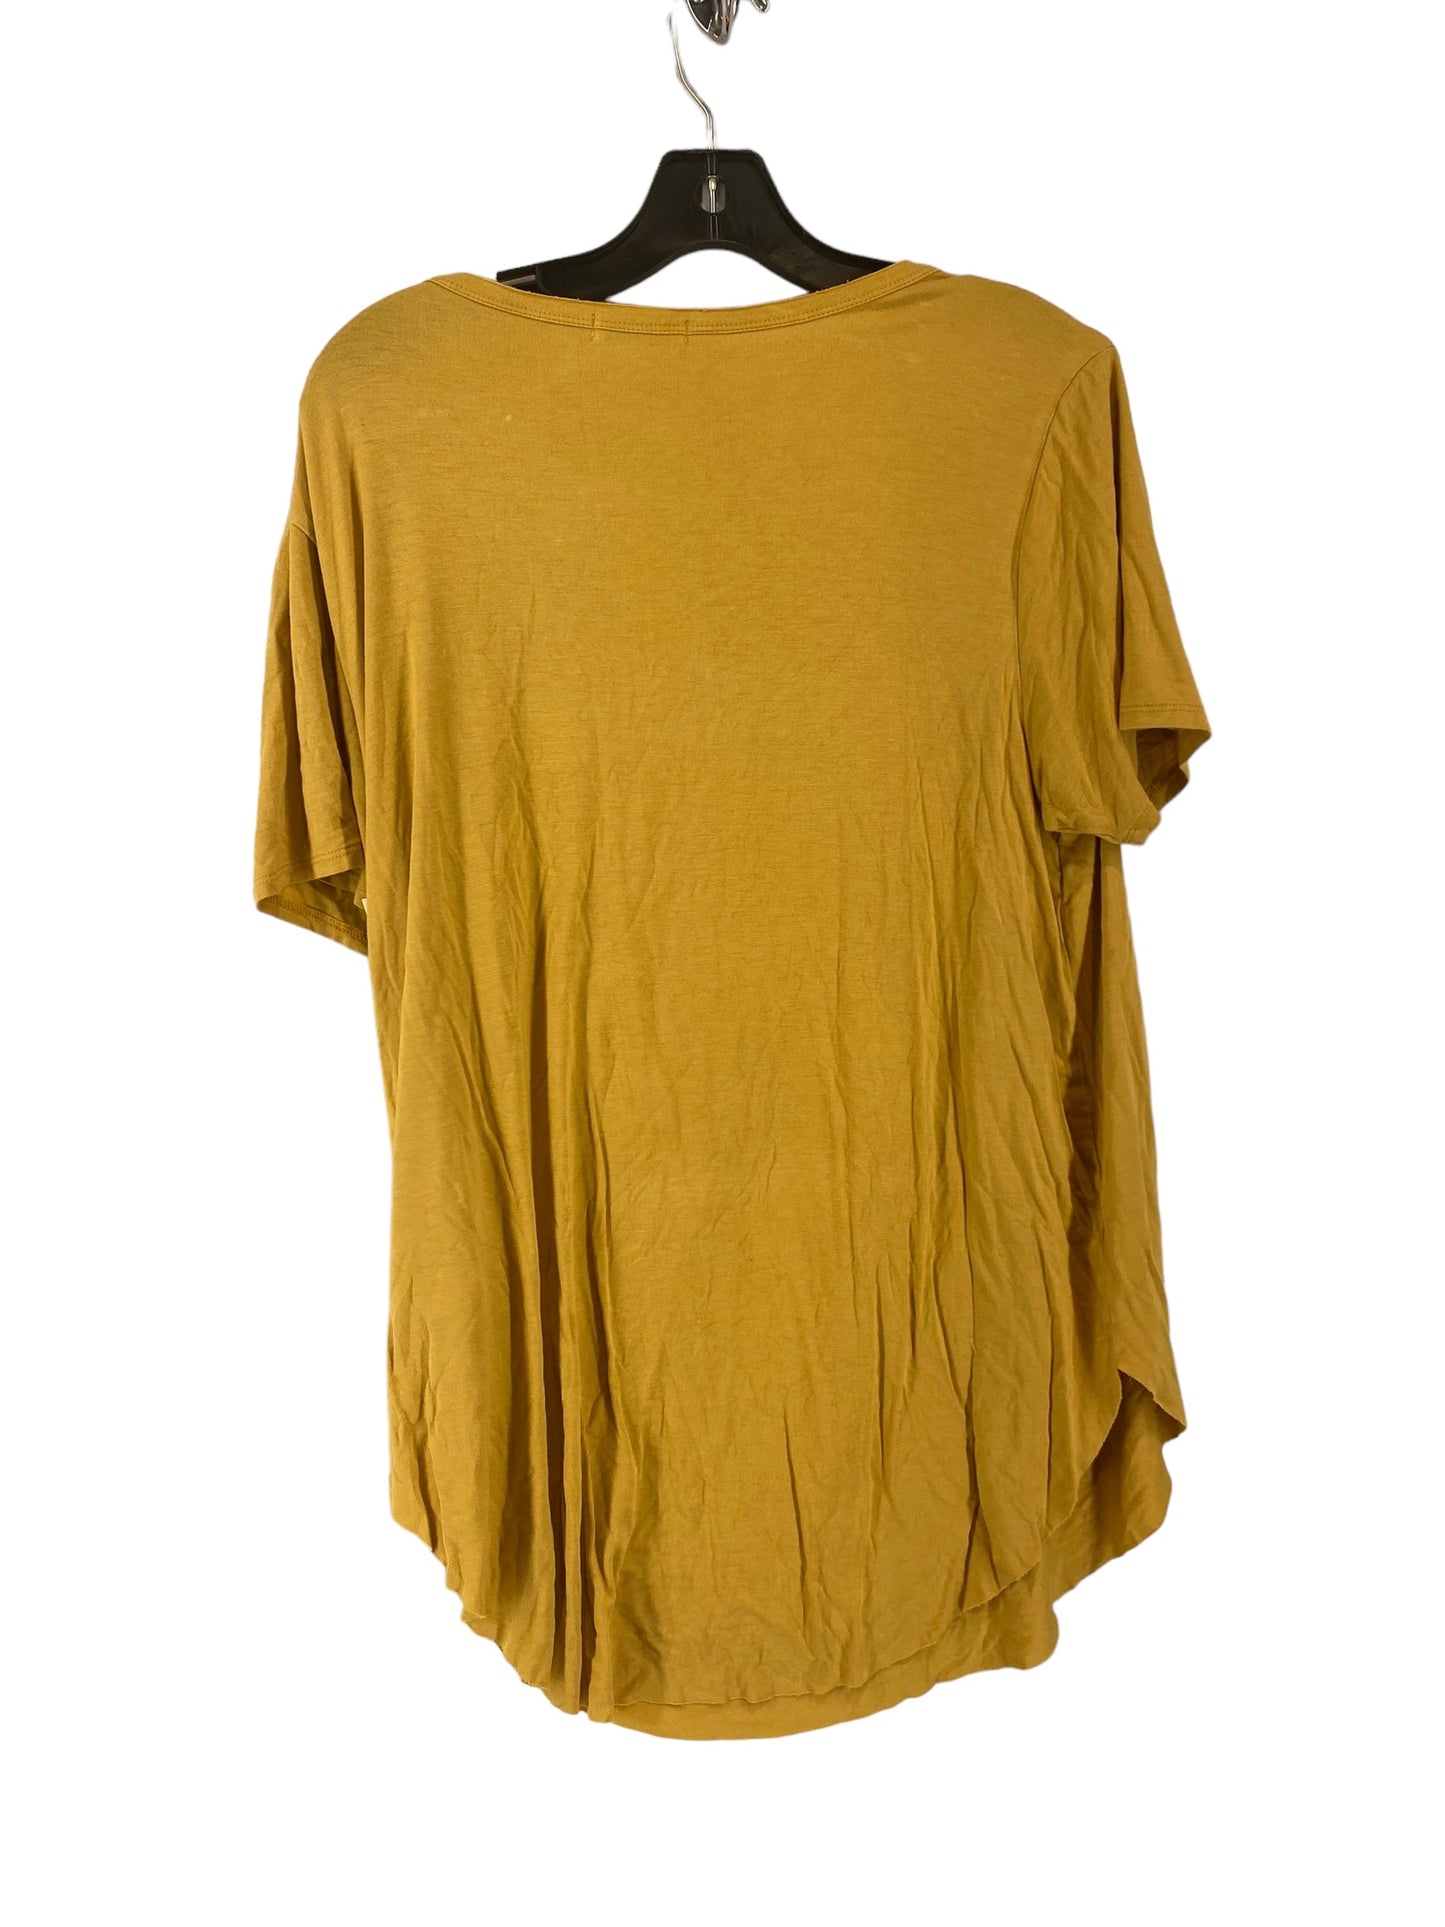 Yellow Top Short Sleeve Basic Clothes Mentor, Size L